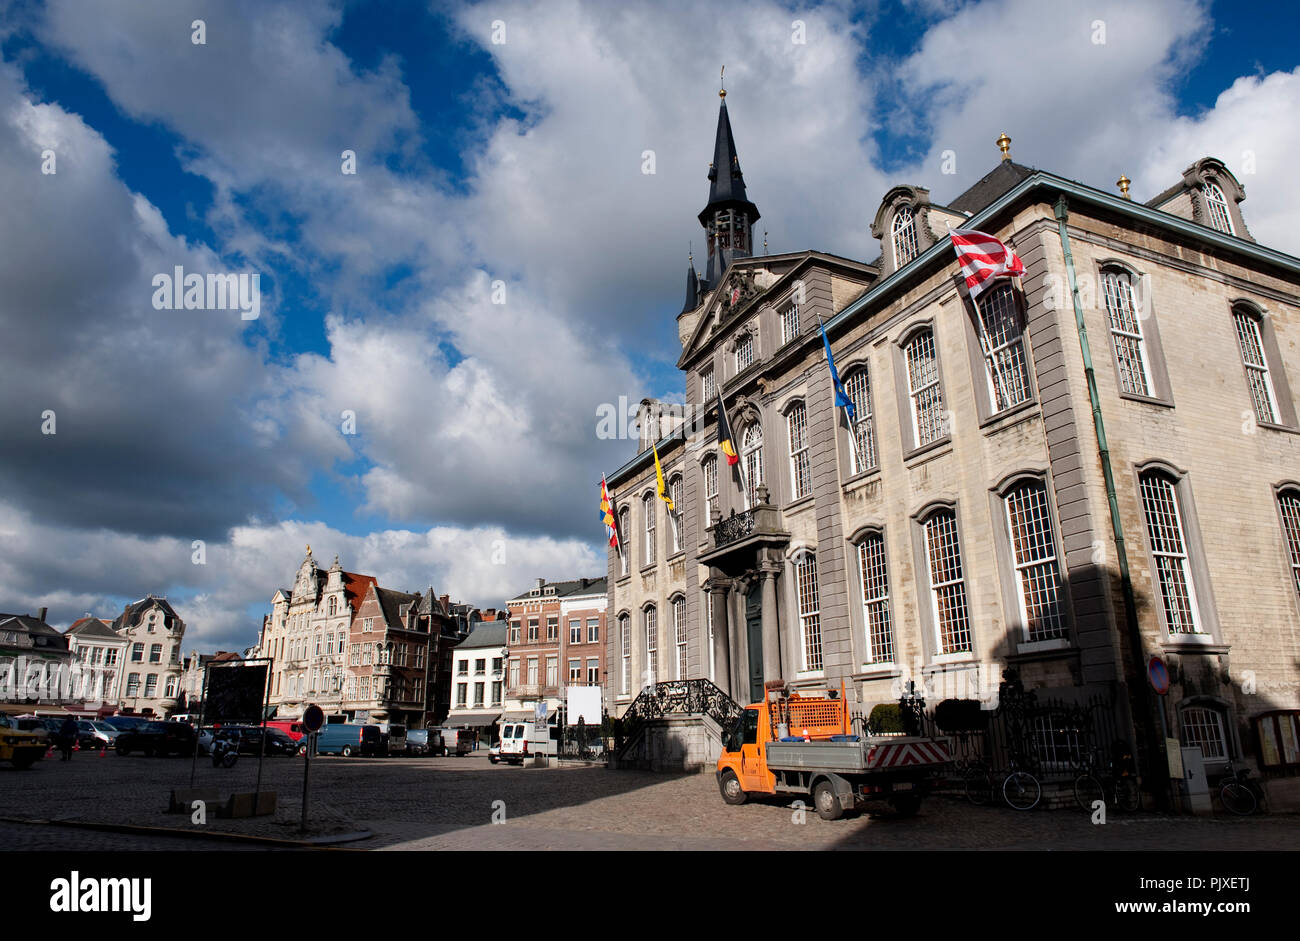 The Town Hall and central square in Lier (Belgium, 25/10/2010) Stock Photo